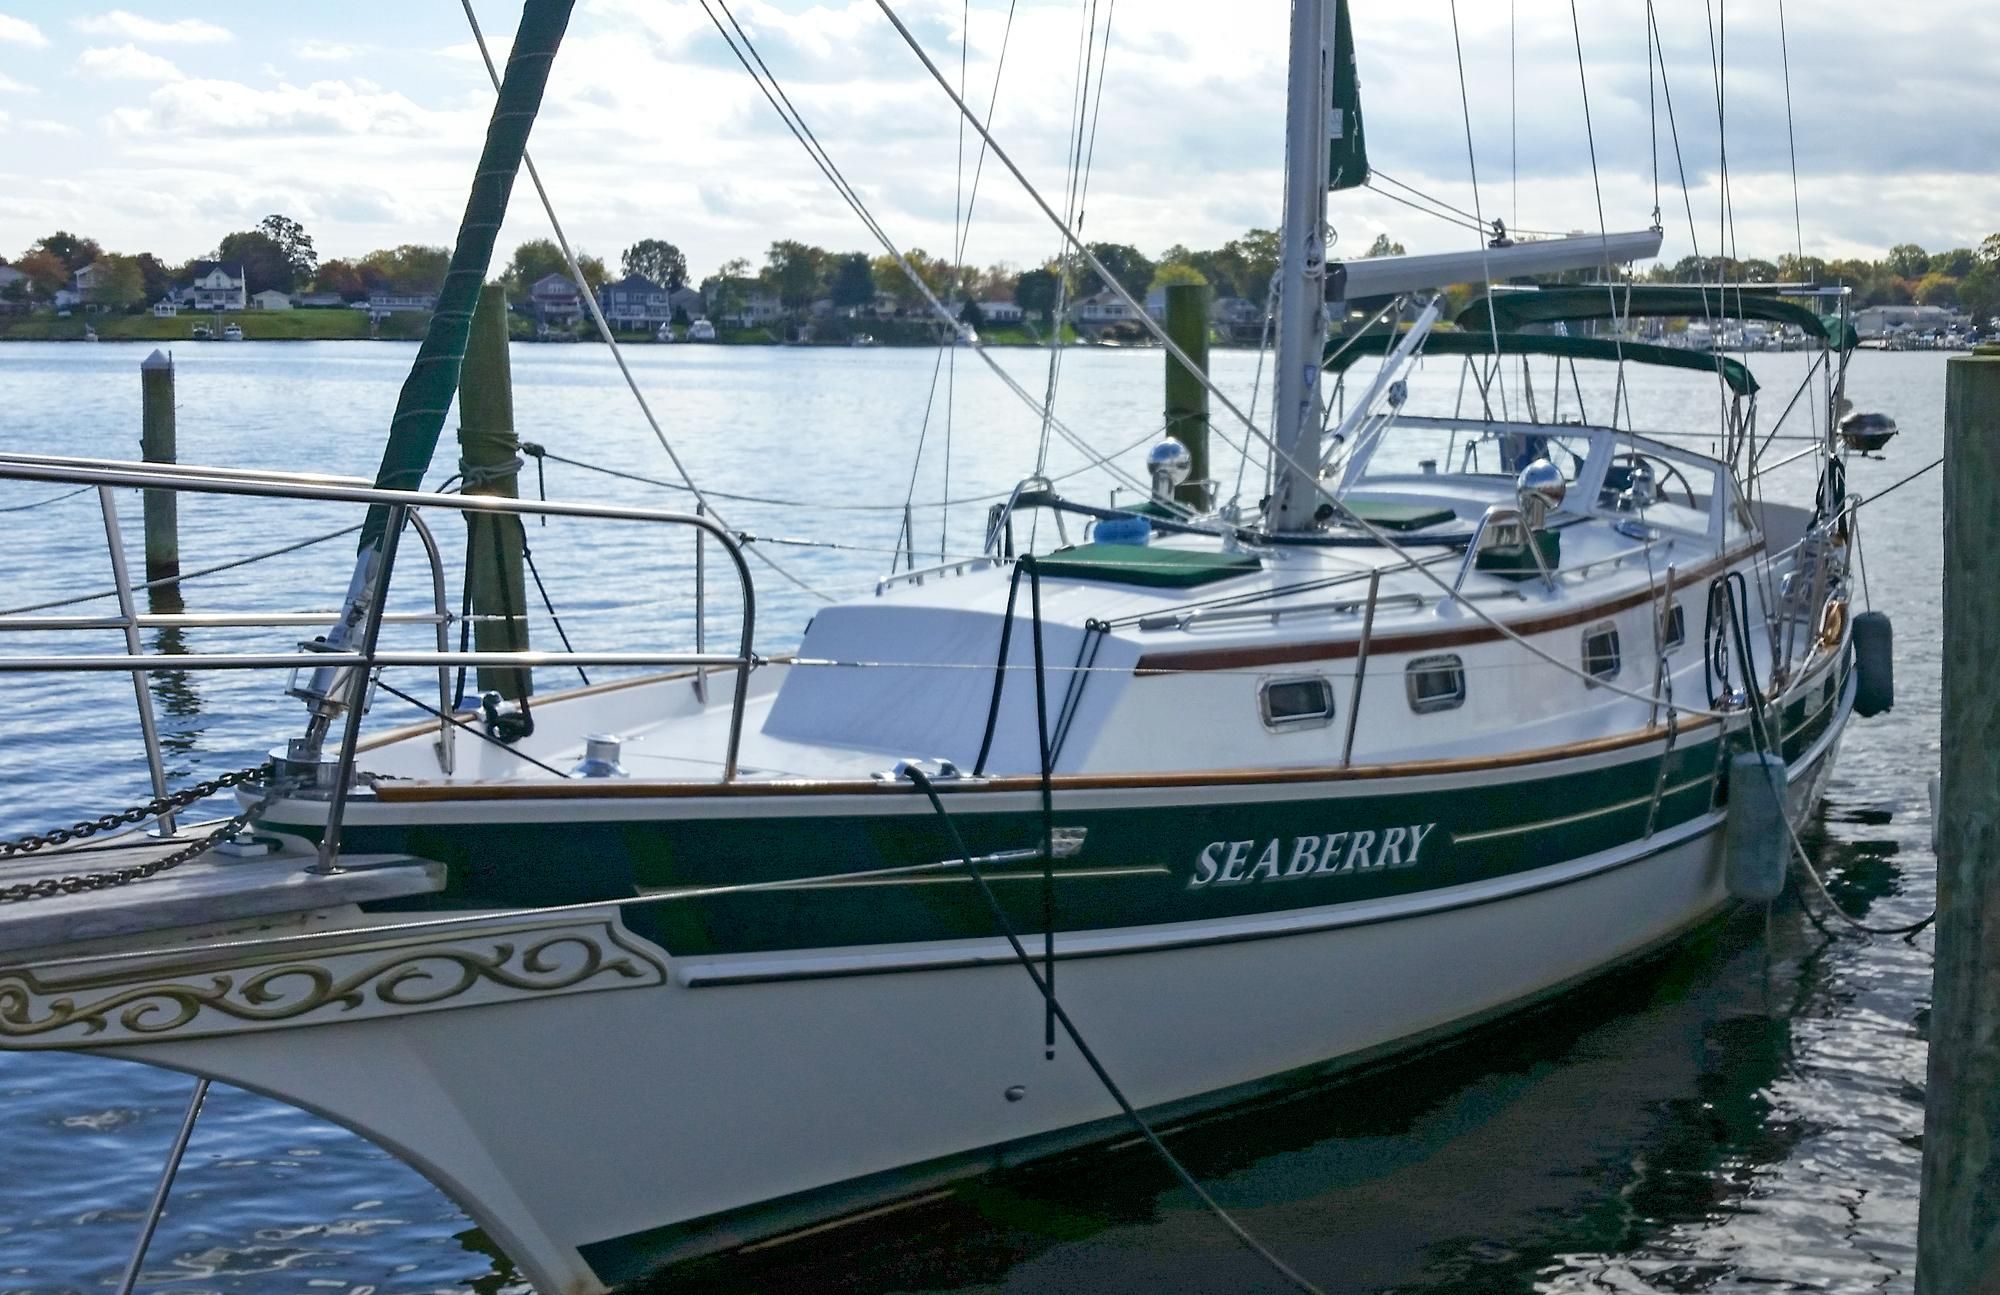 gozzard sailboats for sale by owner